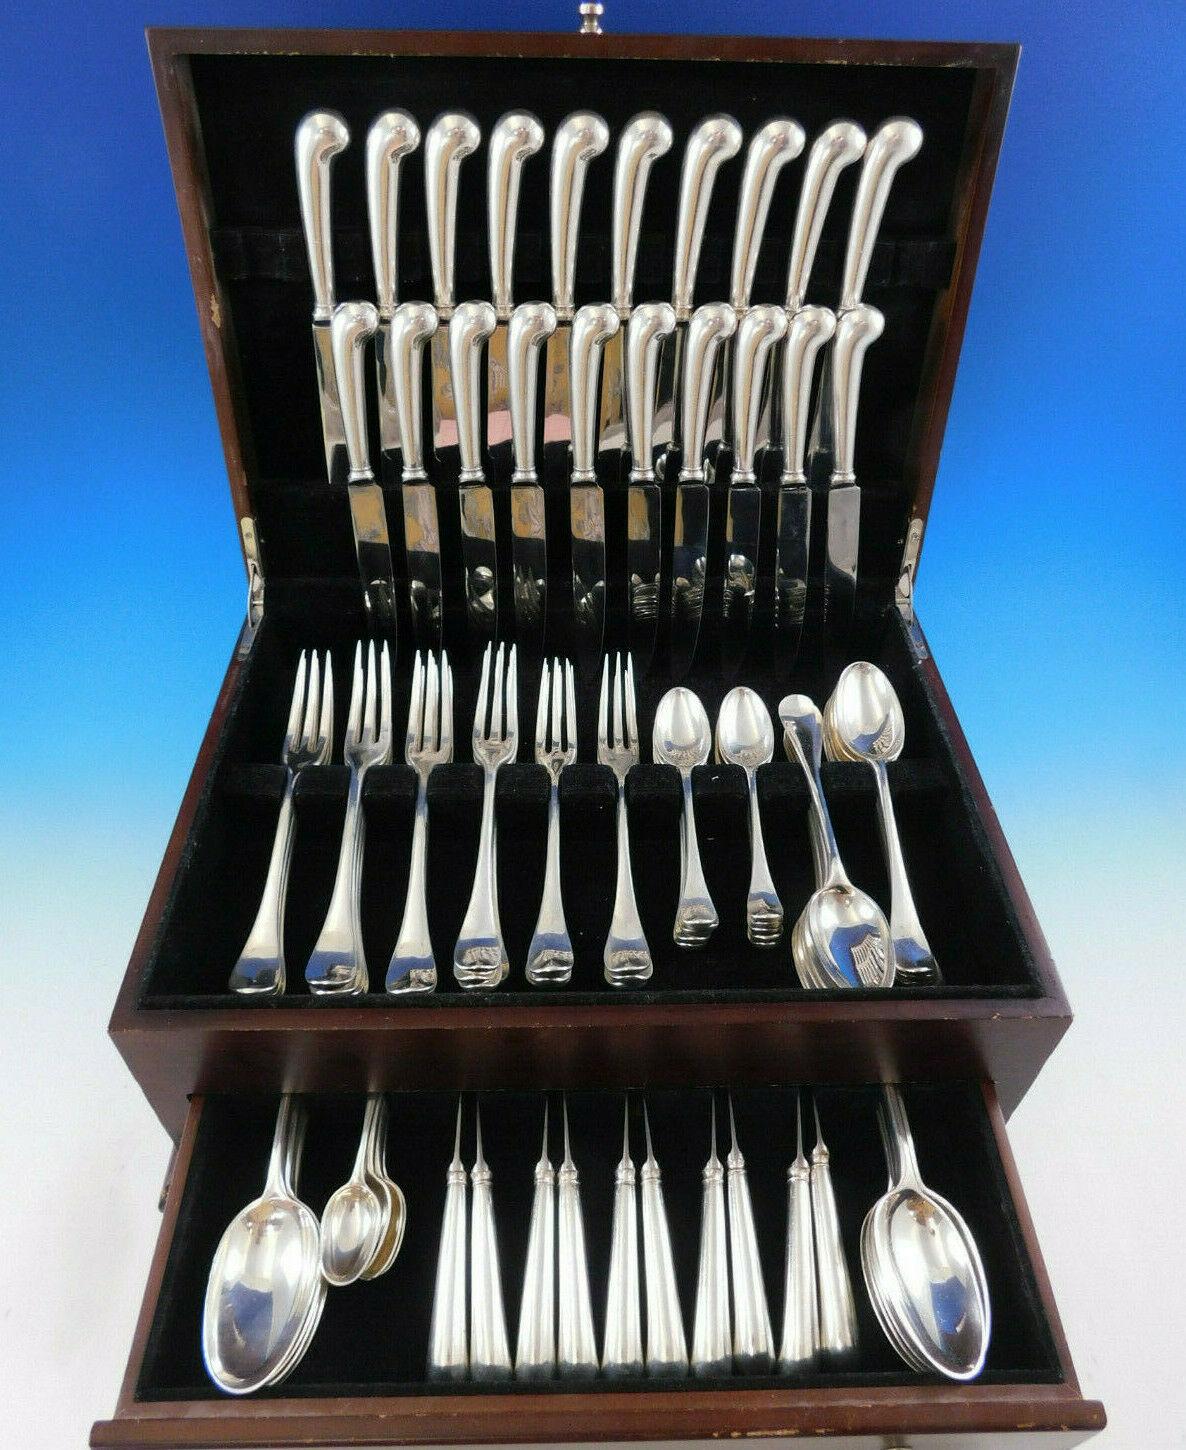 Queen Anne by Robert Welch (England) sterling silver flatware set, 86 pieces. This set was made in the year 1972 and includes:

10 dinner knives, pistol grip handle, 9 3/8